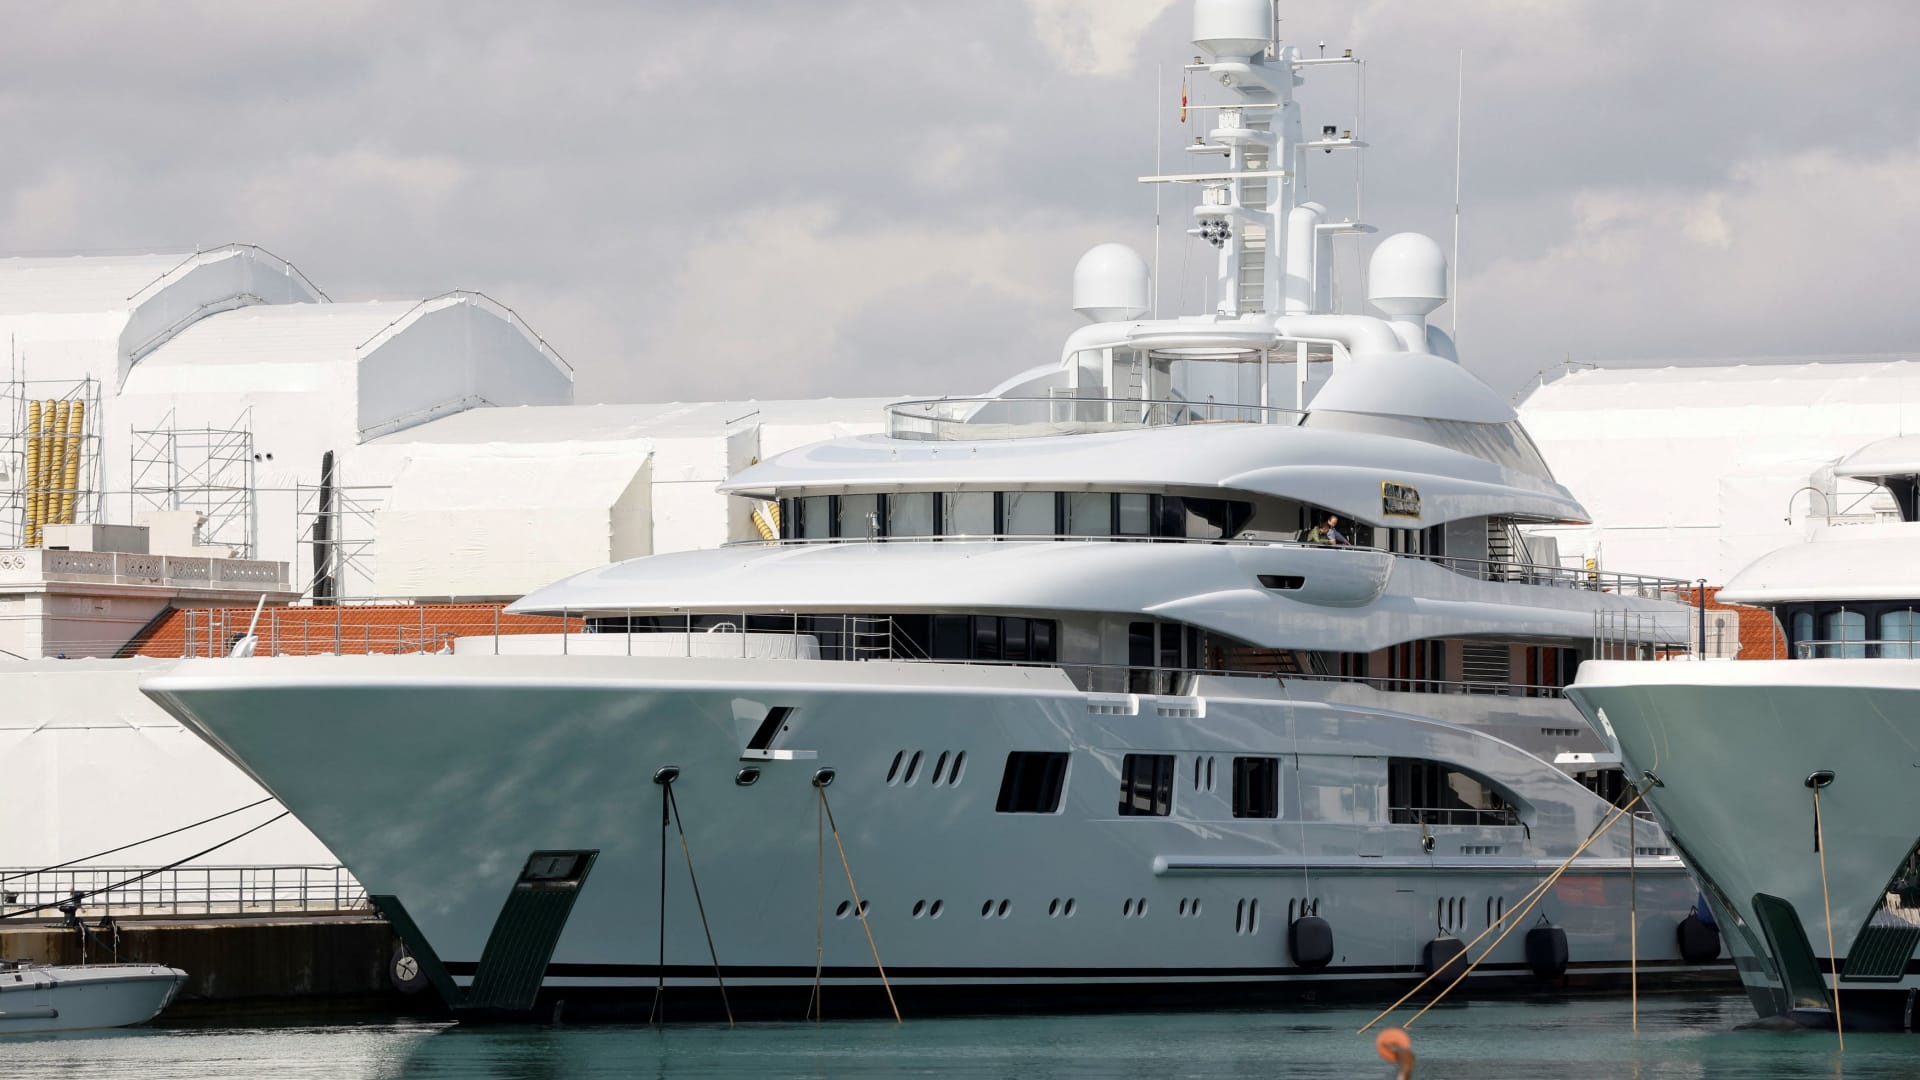 Superyacht Valerie, linked to chief of Russian state aerospace and defence conglomerate Rostec Sergei Chemezov, is seen at Barcelona Port in Barcelona city, Spain, March 9, 2022.